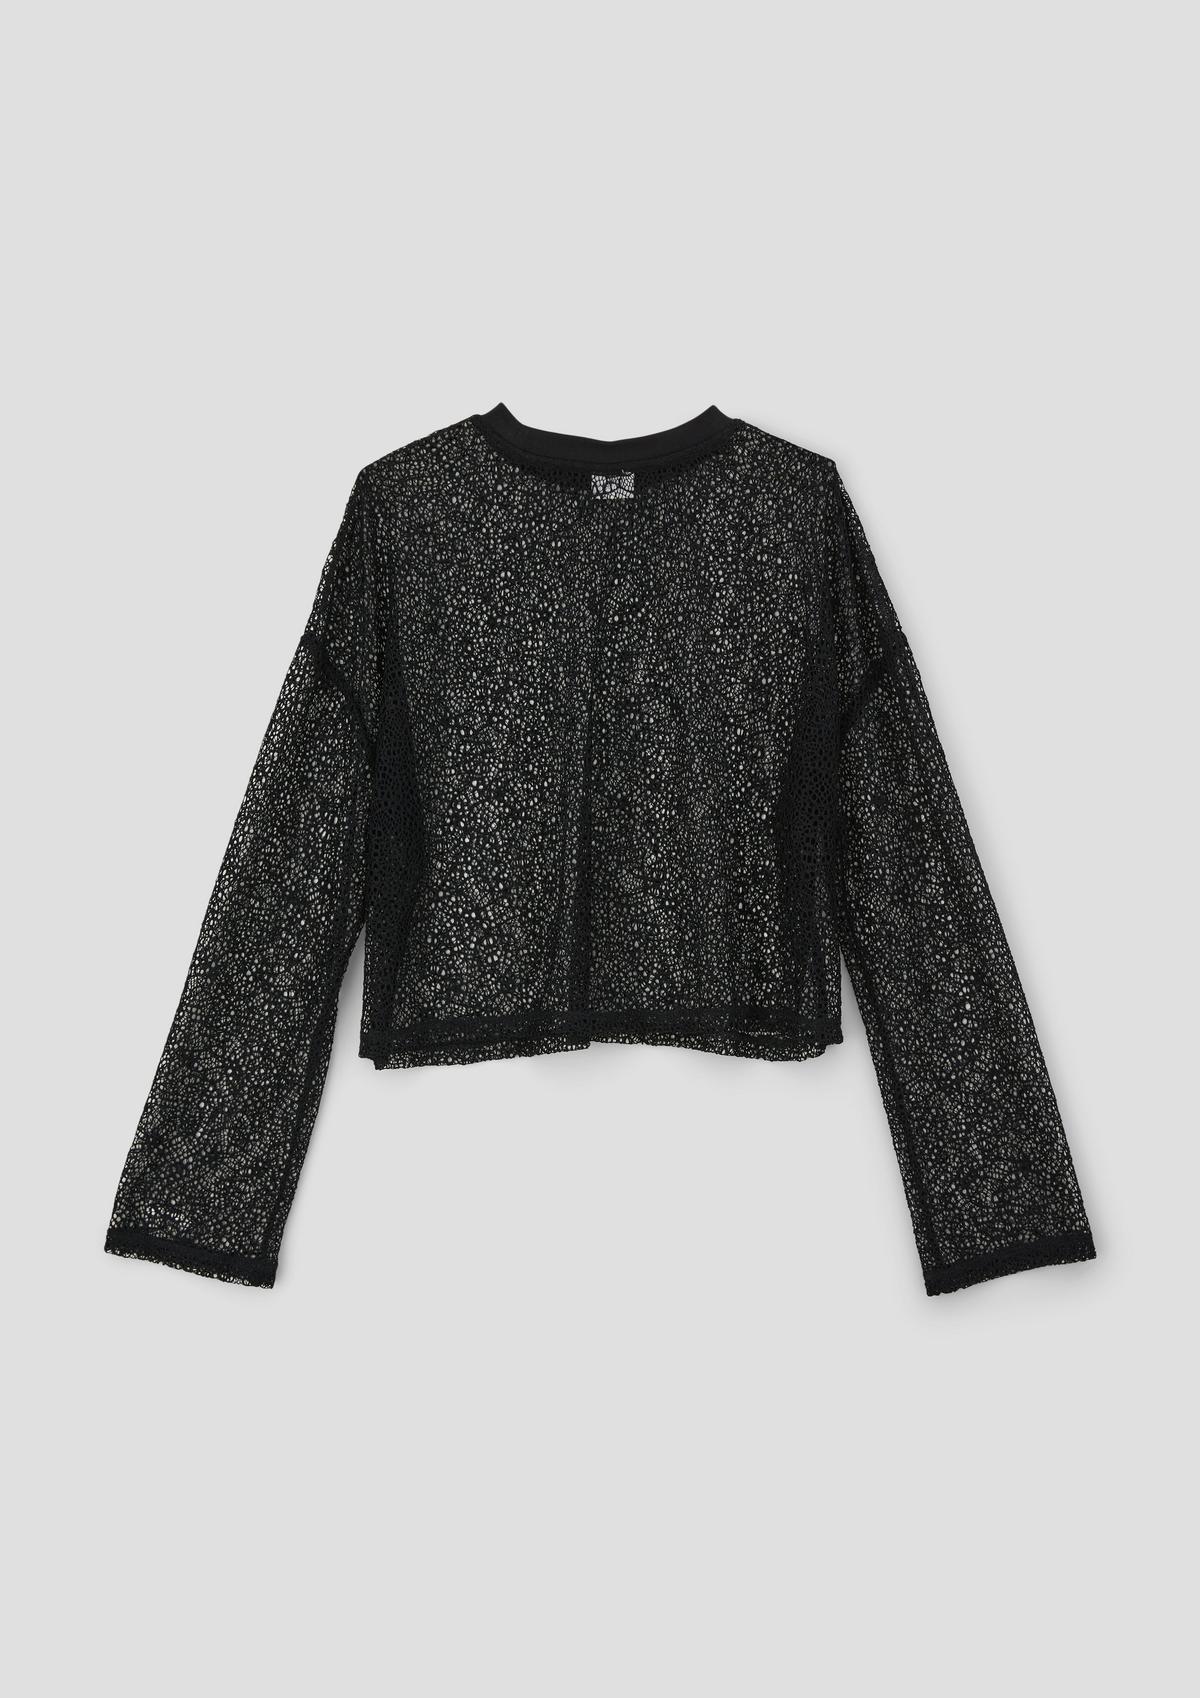 s.Oliver Long sleeve top made of mesh lace